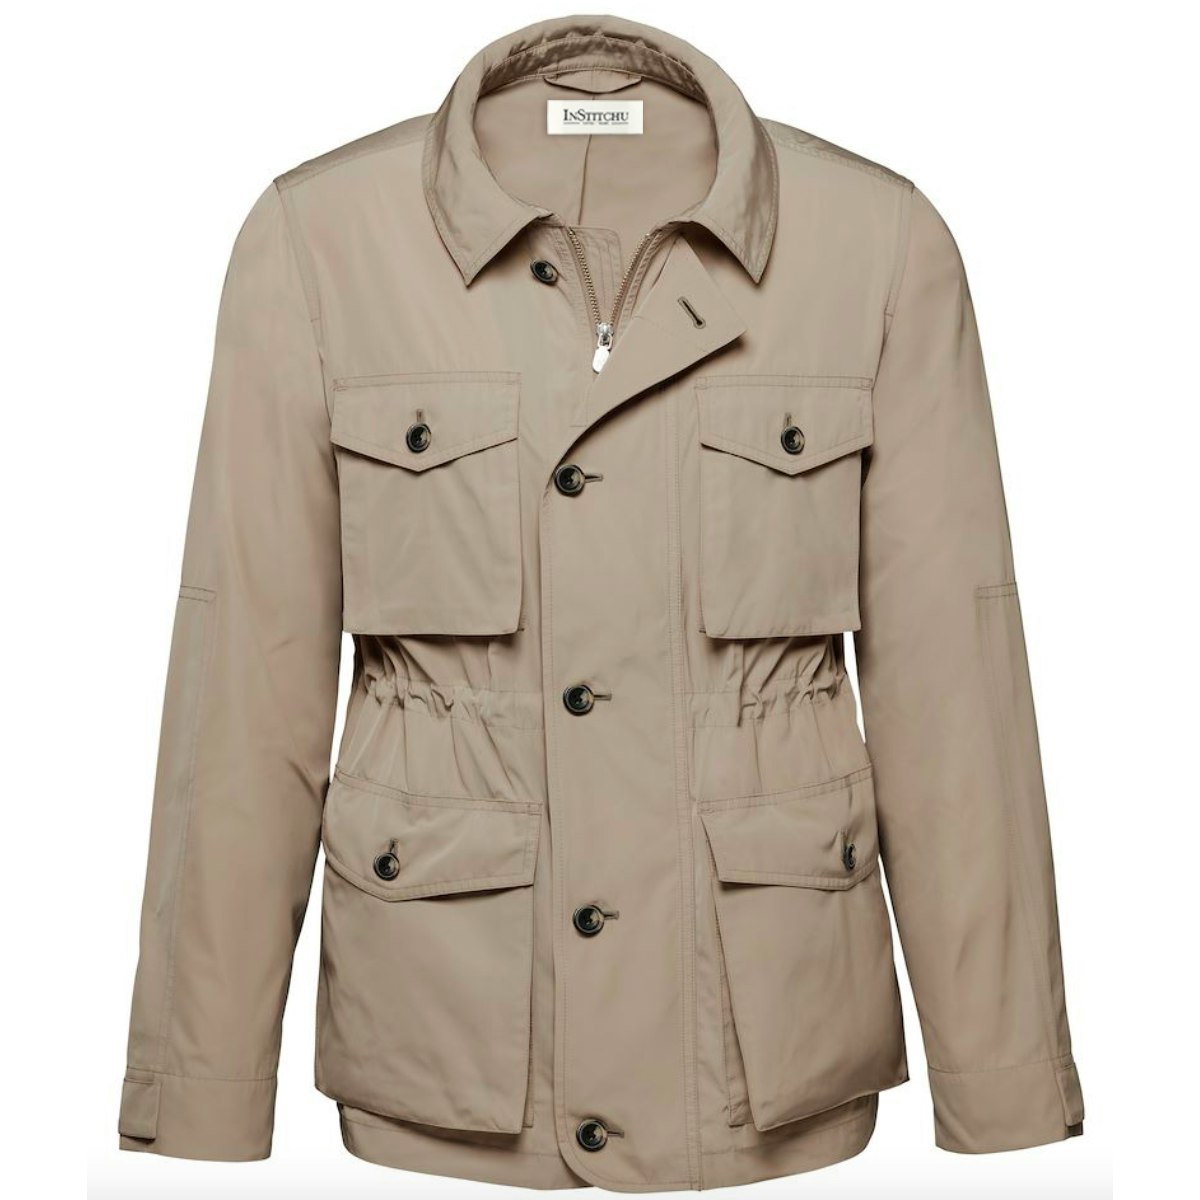 The Hunt Taupe Field Jacket